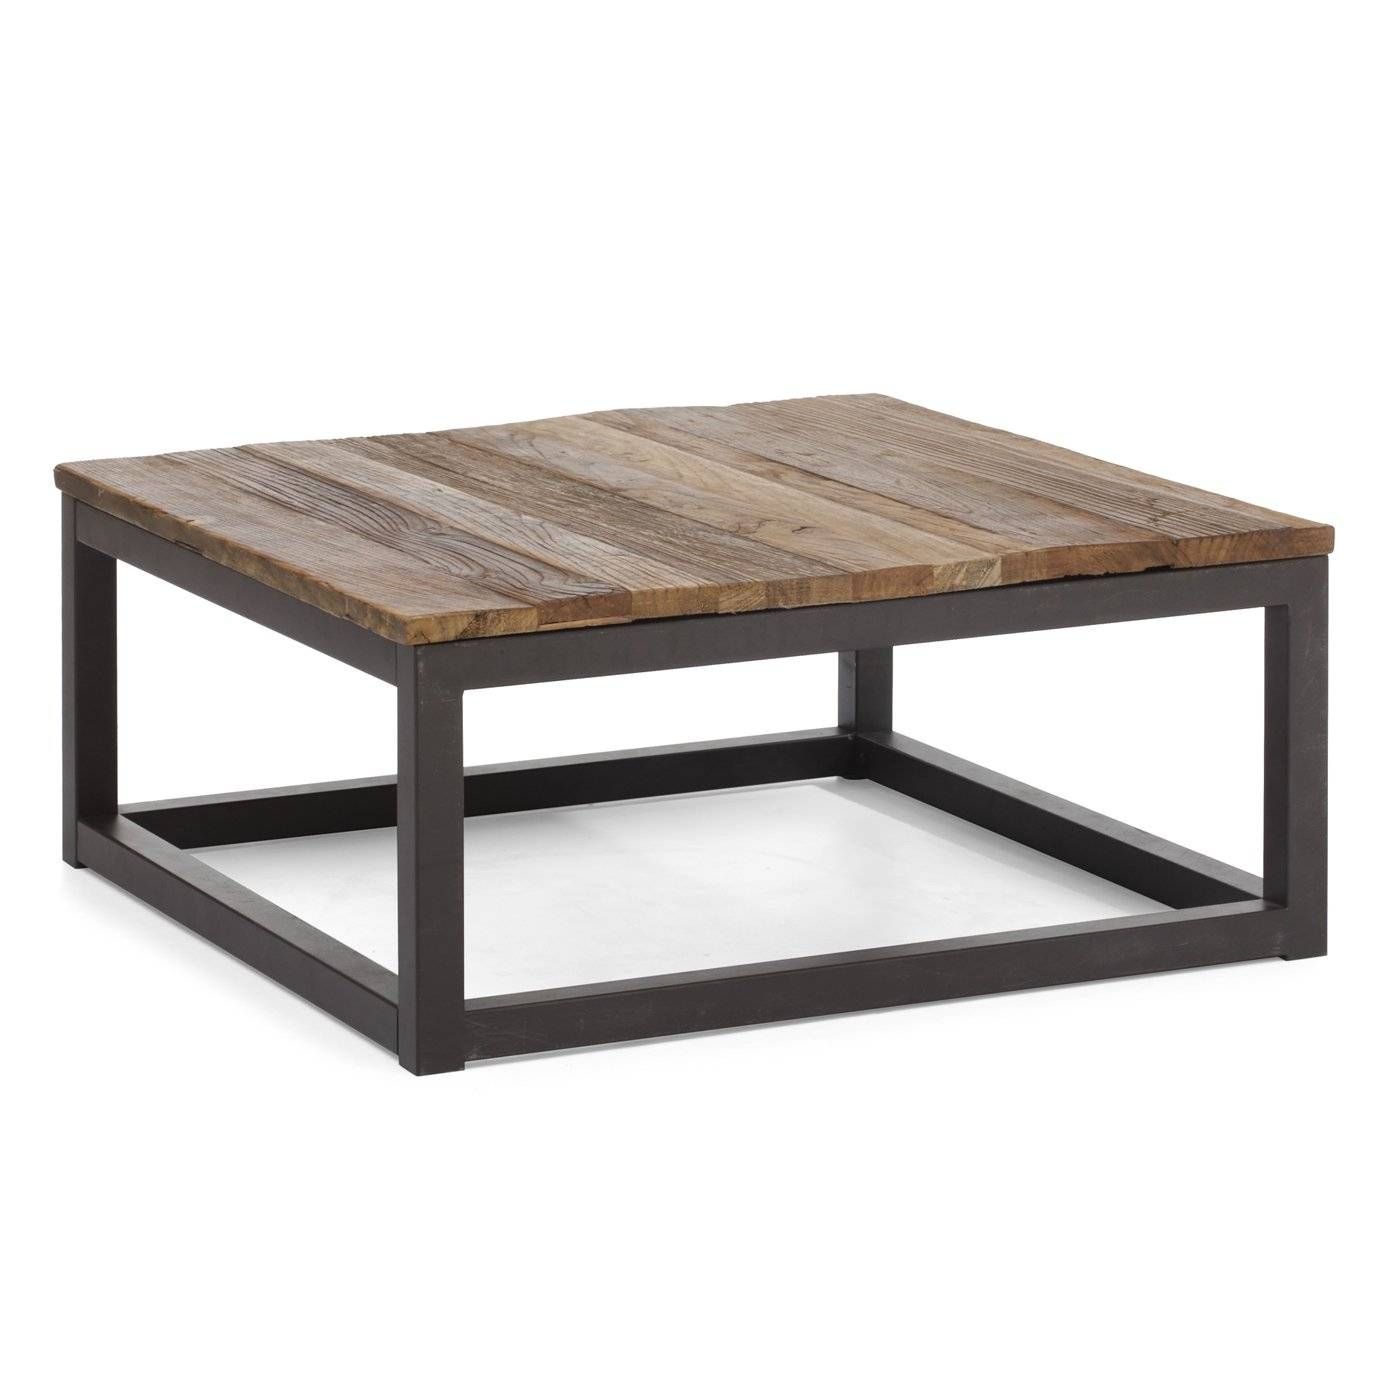 The Distressed Coffee Table And Important Considerations Furniture Within Square Shaped Coffee Tables (View 15 of 30)